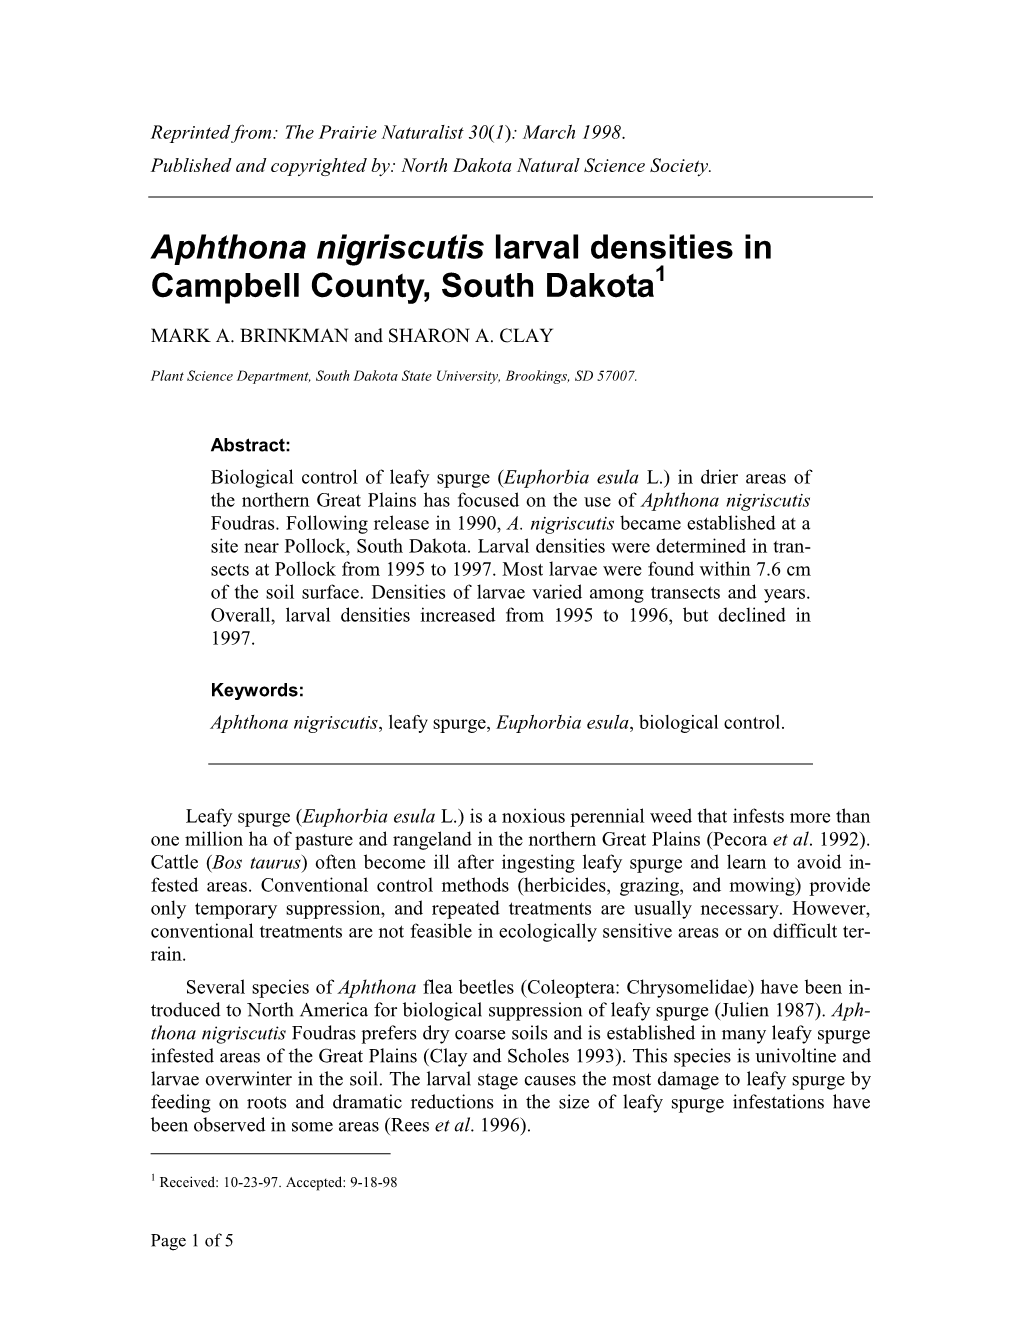 Aphthona Nigriscutis Larval Densities in Campbell County, South Dakota1